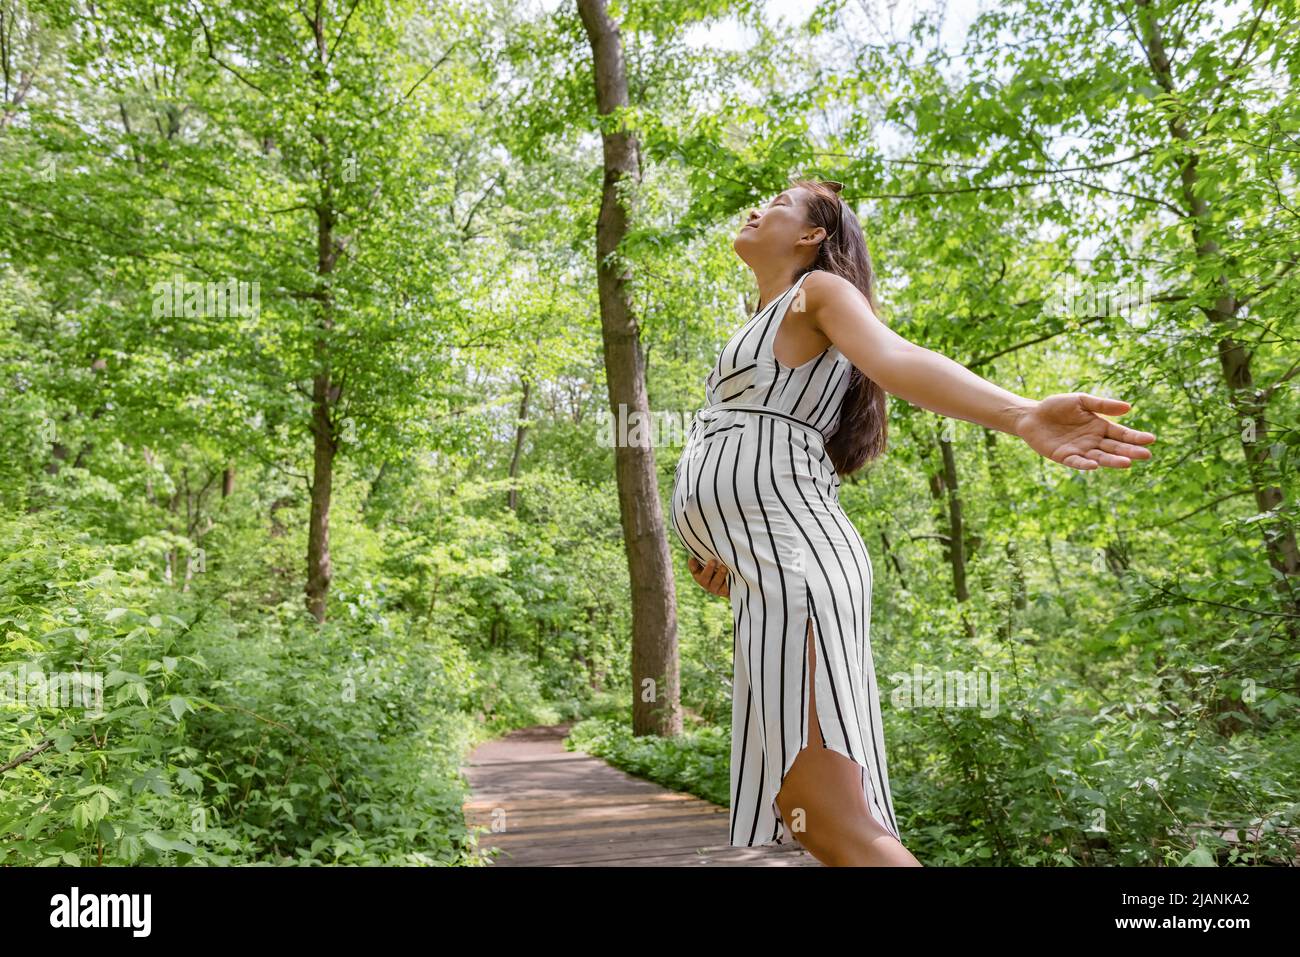 Pregnant woman happy in sustainable forest nature outdoors with open arms in freedom. Health, eco-friendly environment conservation concept. Pregnancy Stock Photo